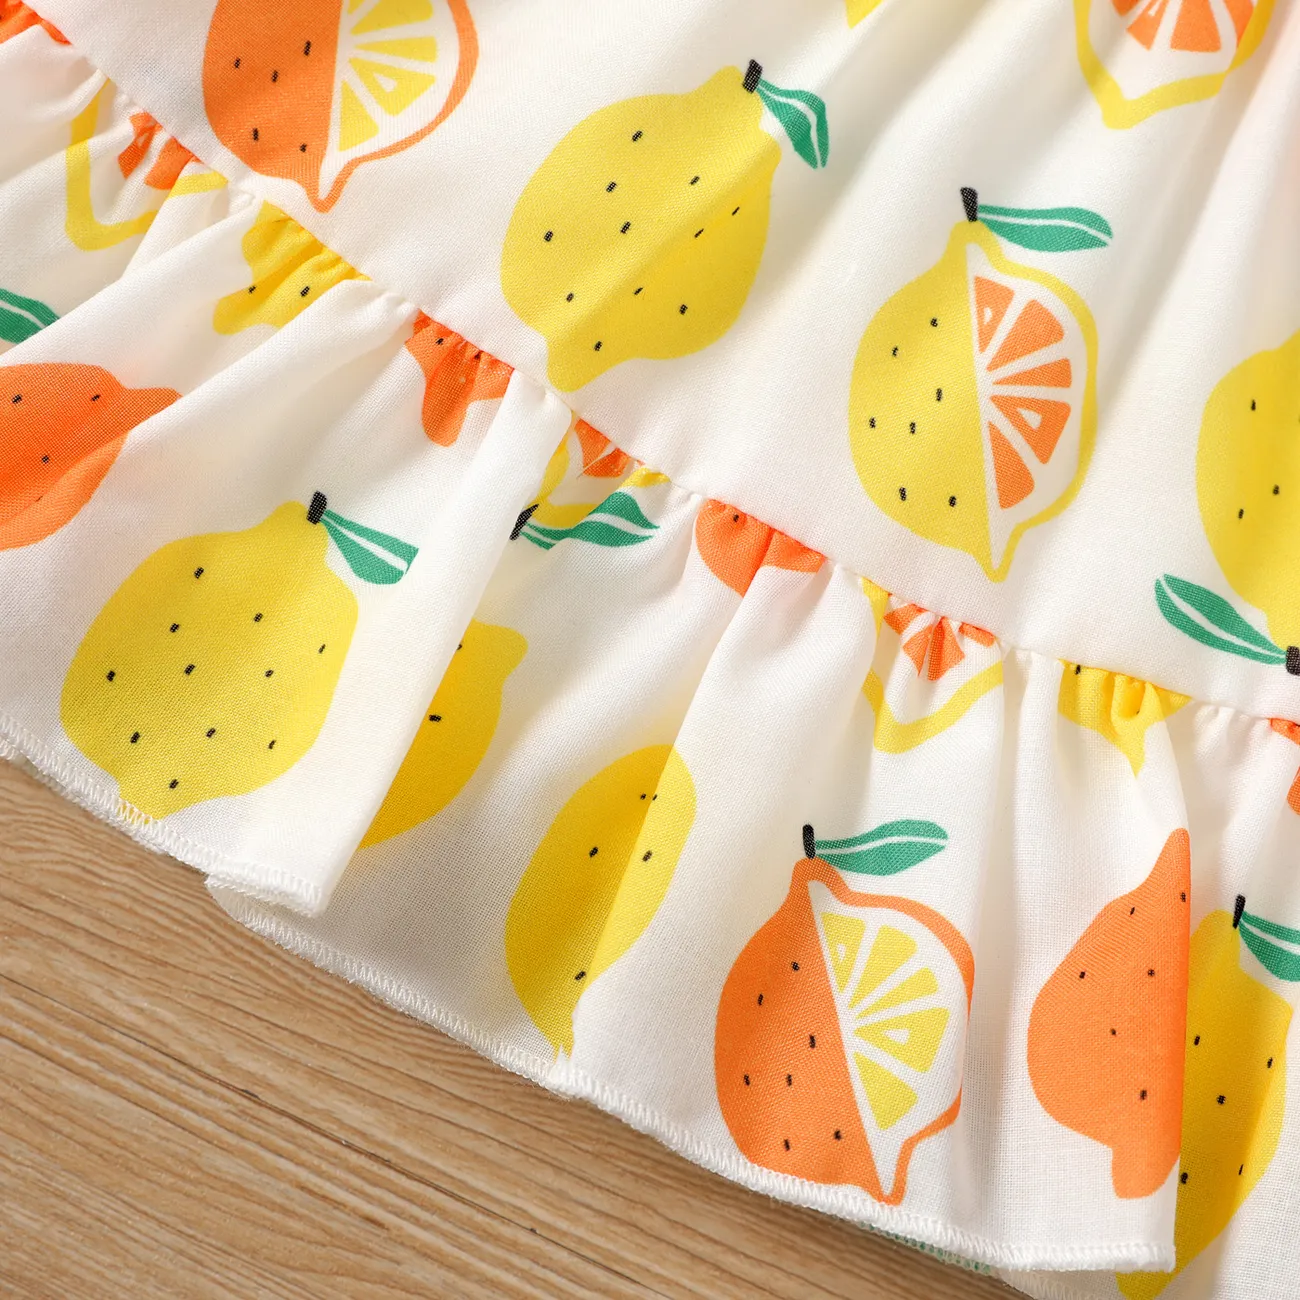 2pcs Baby Girl Solid Cotton Ribbed Ruffle-sleeve Twist Knot Crop Top and Allover Fruit Print Skirt Set Orange big image 1